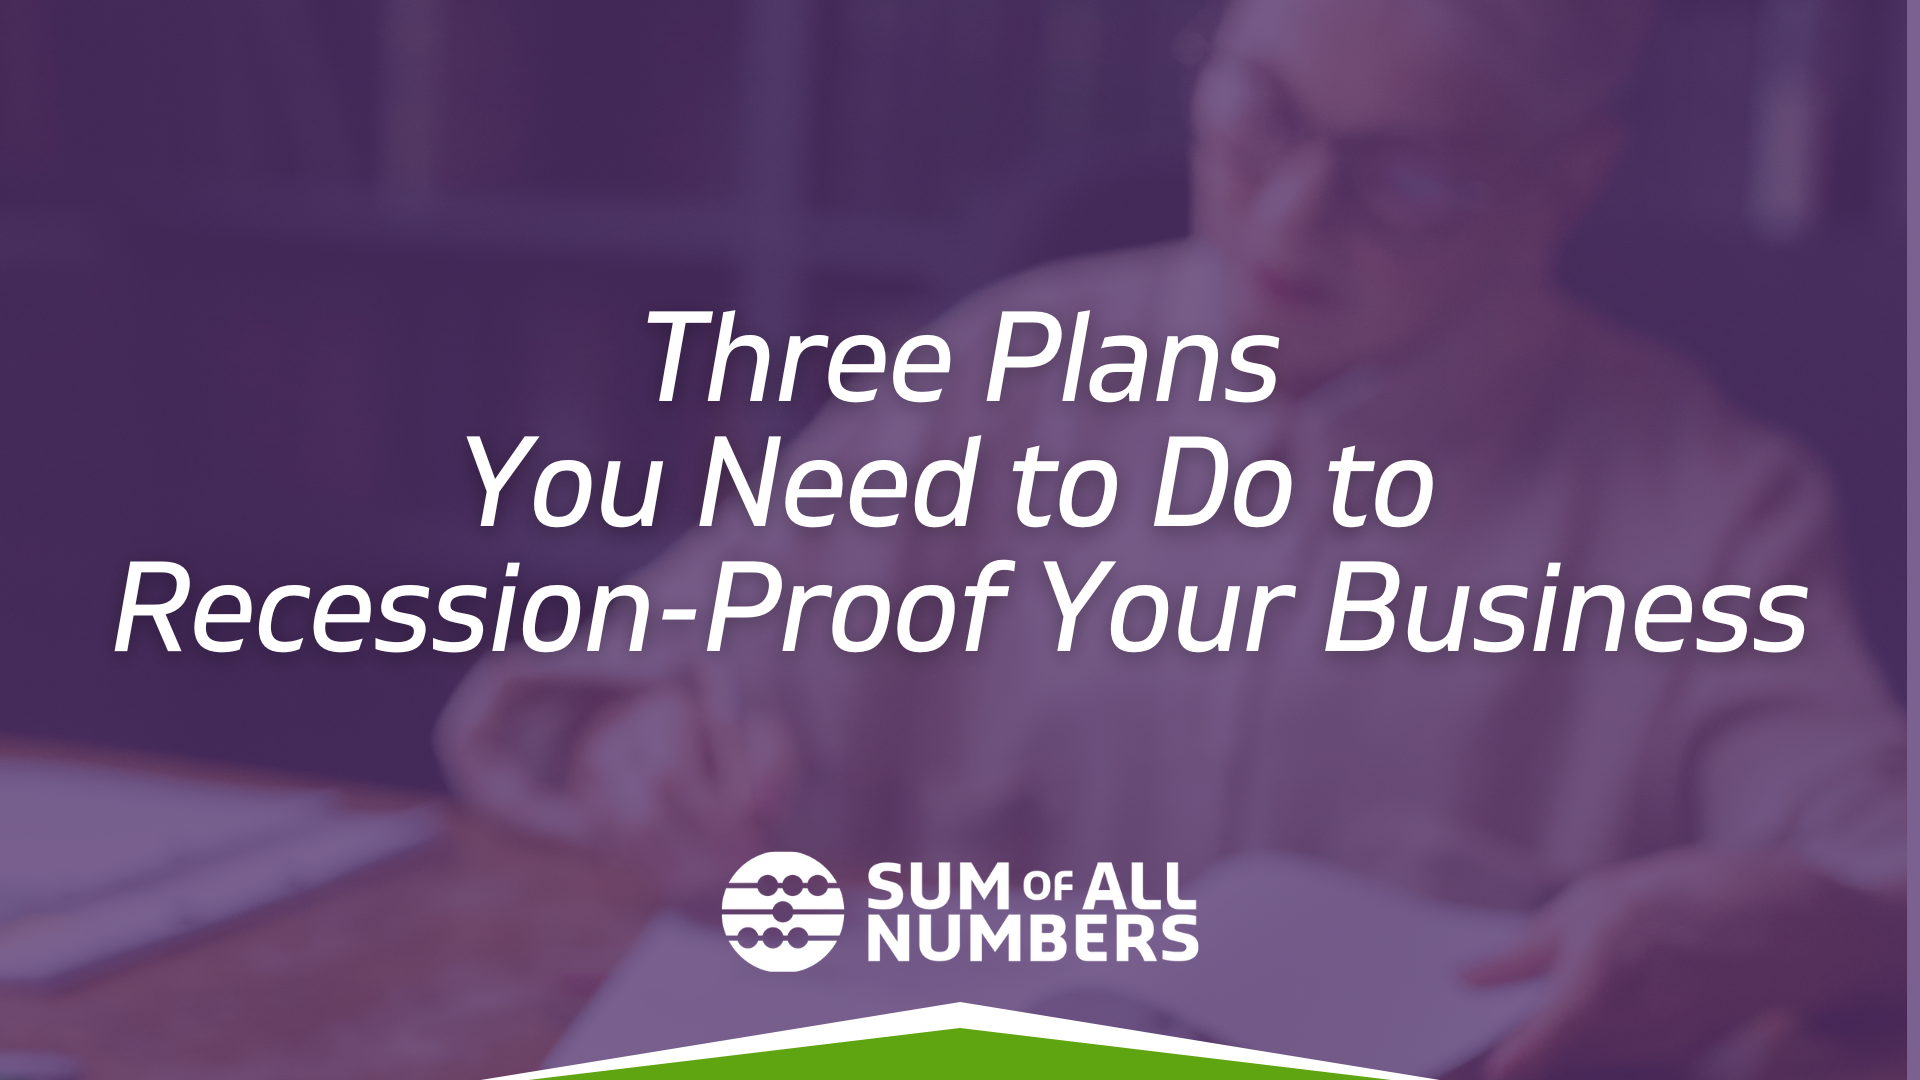 Three Plans You Need to Do to Recession-Proof Your Business